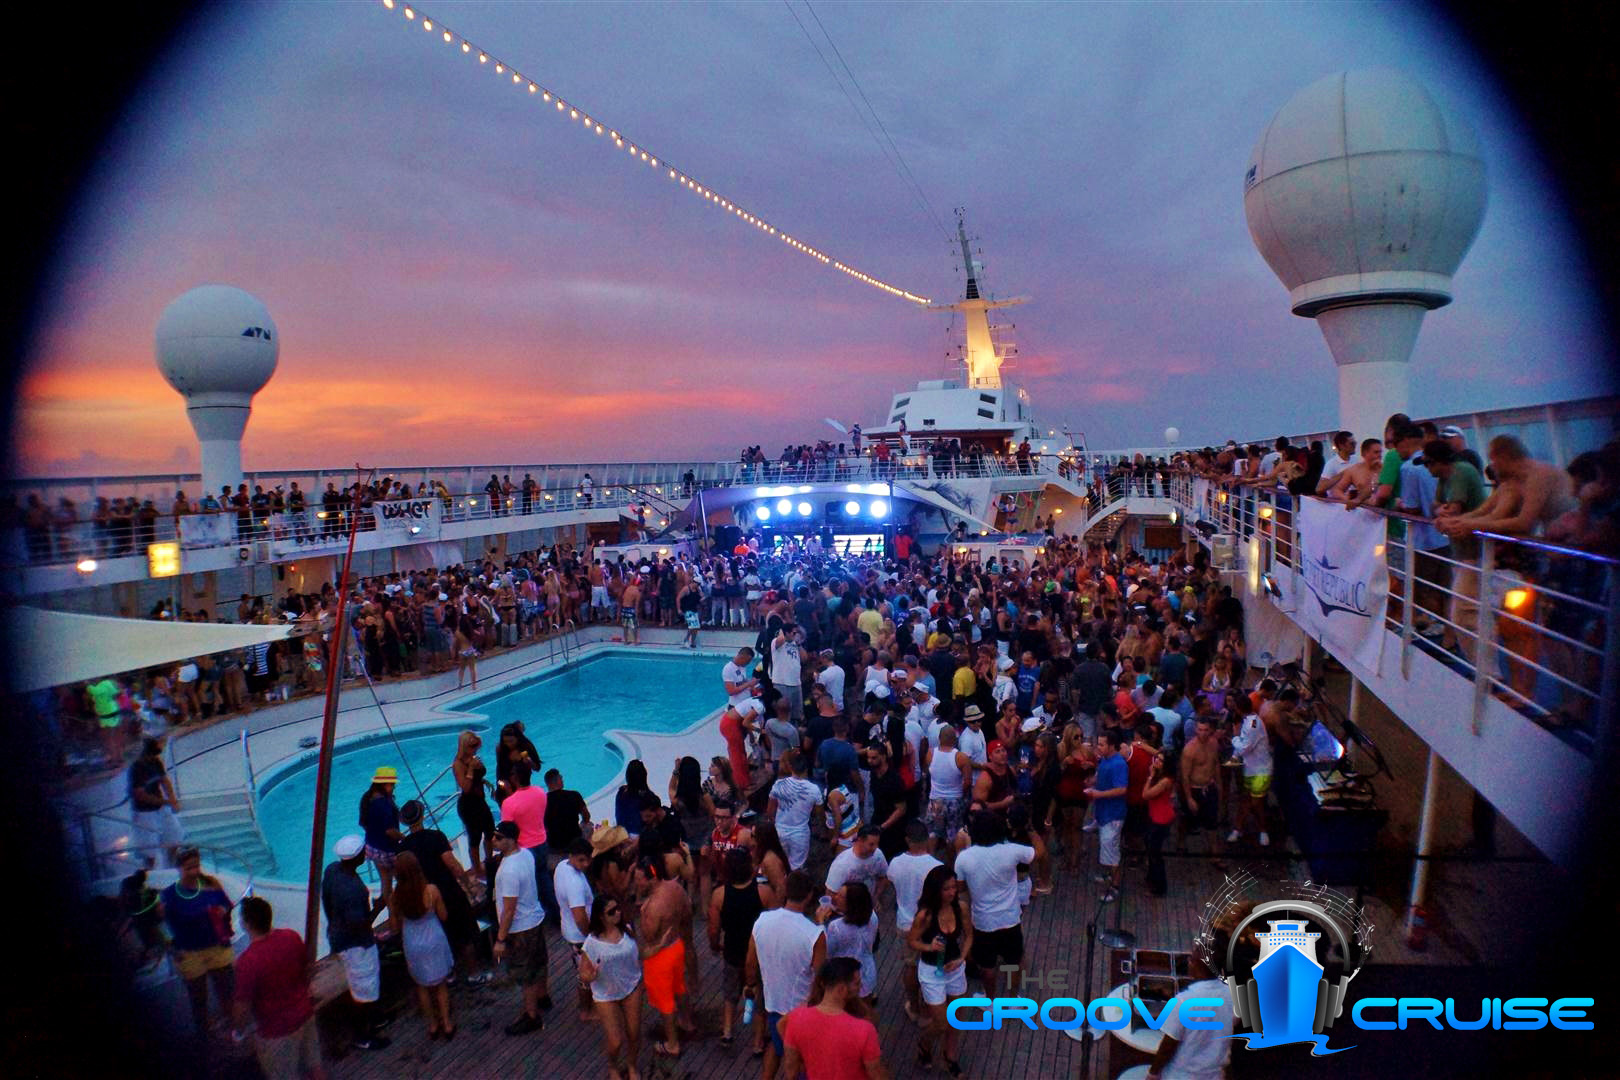 The Groove Cruise is the world's largest floating dance music festival (Photo courtesy of The Groove Cruise).